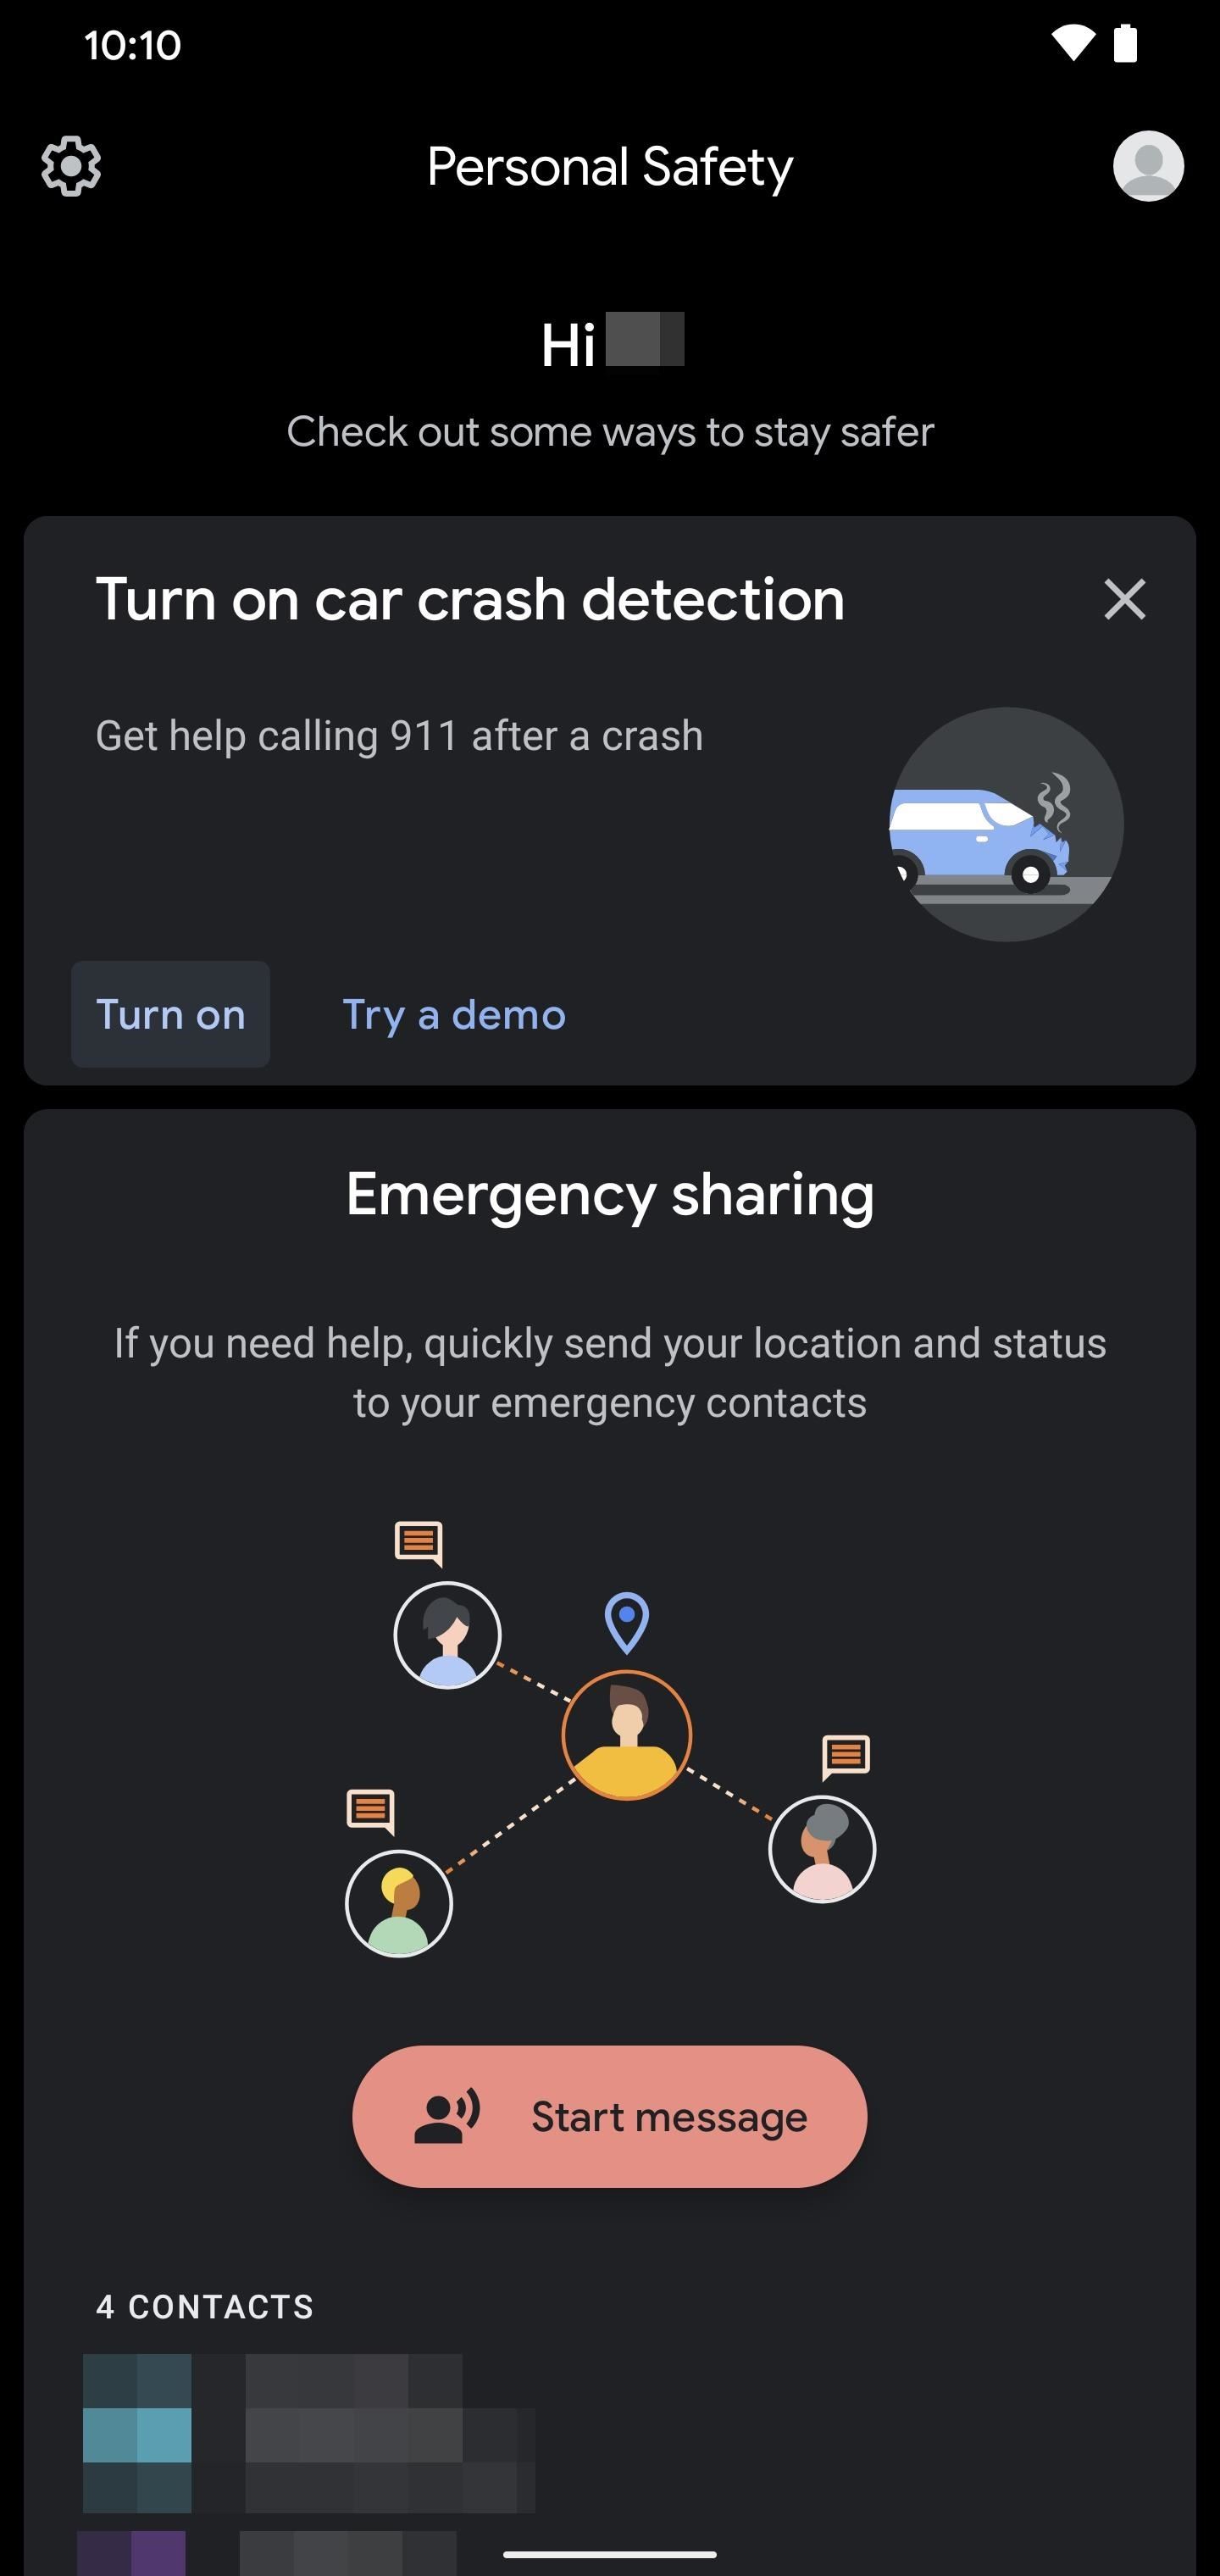 How to Set Up Car Crash Detection on Your Pixel to Contact Emergency Services When You Can't